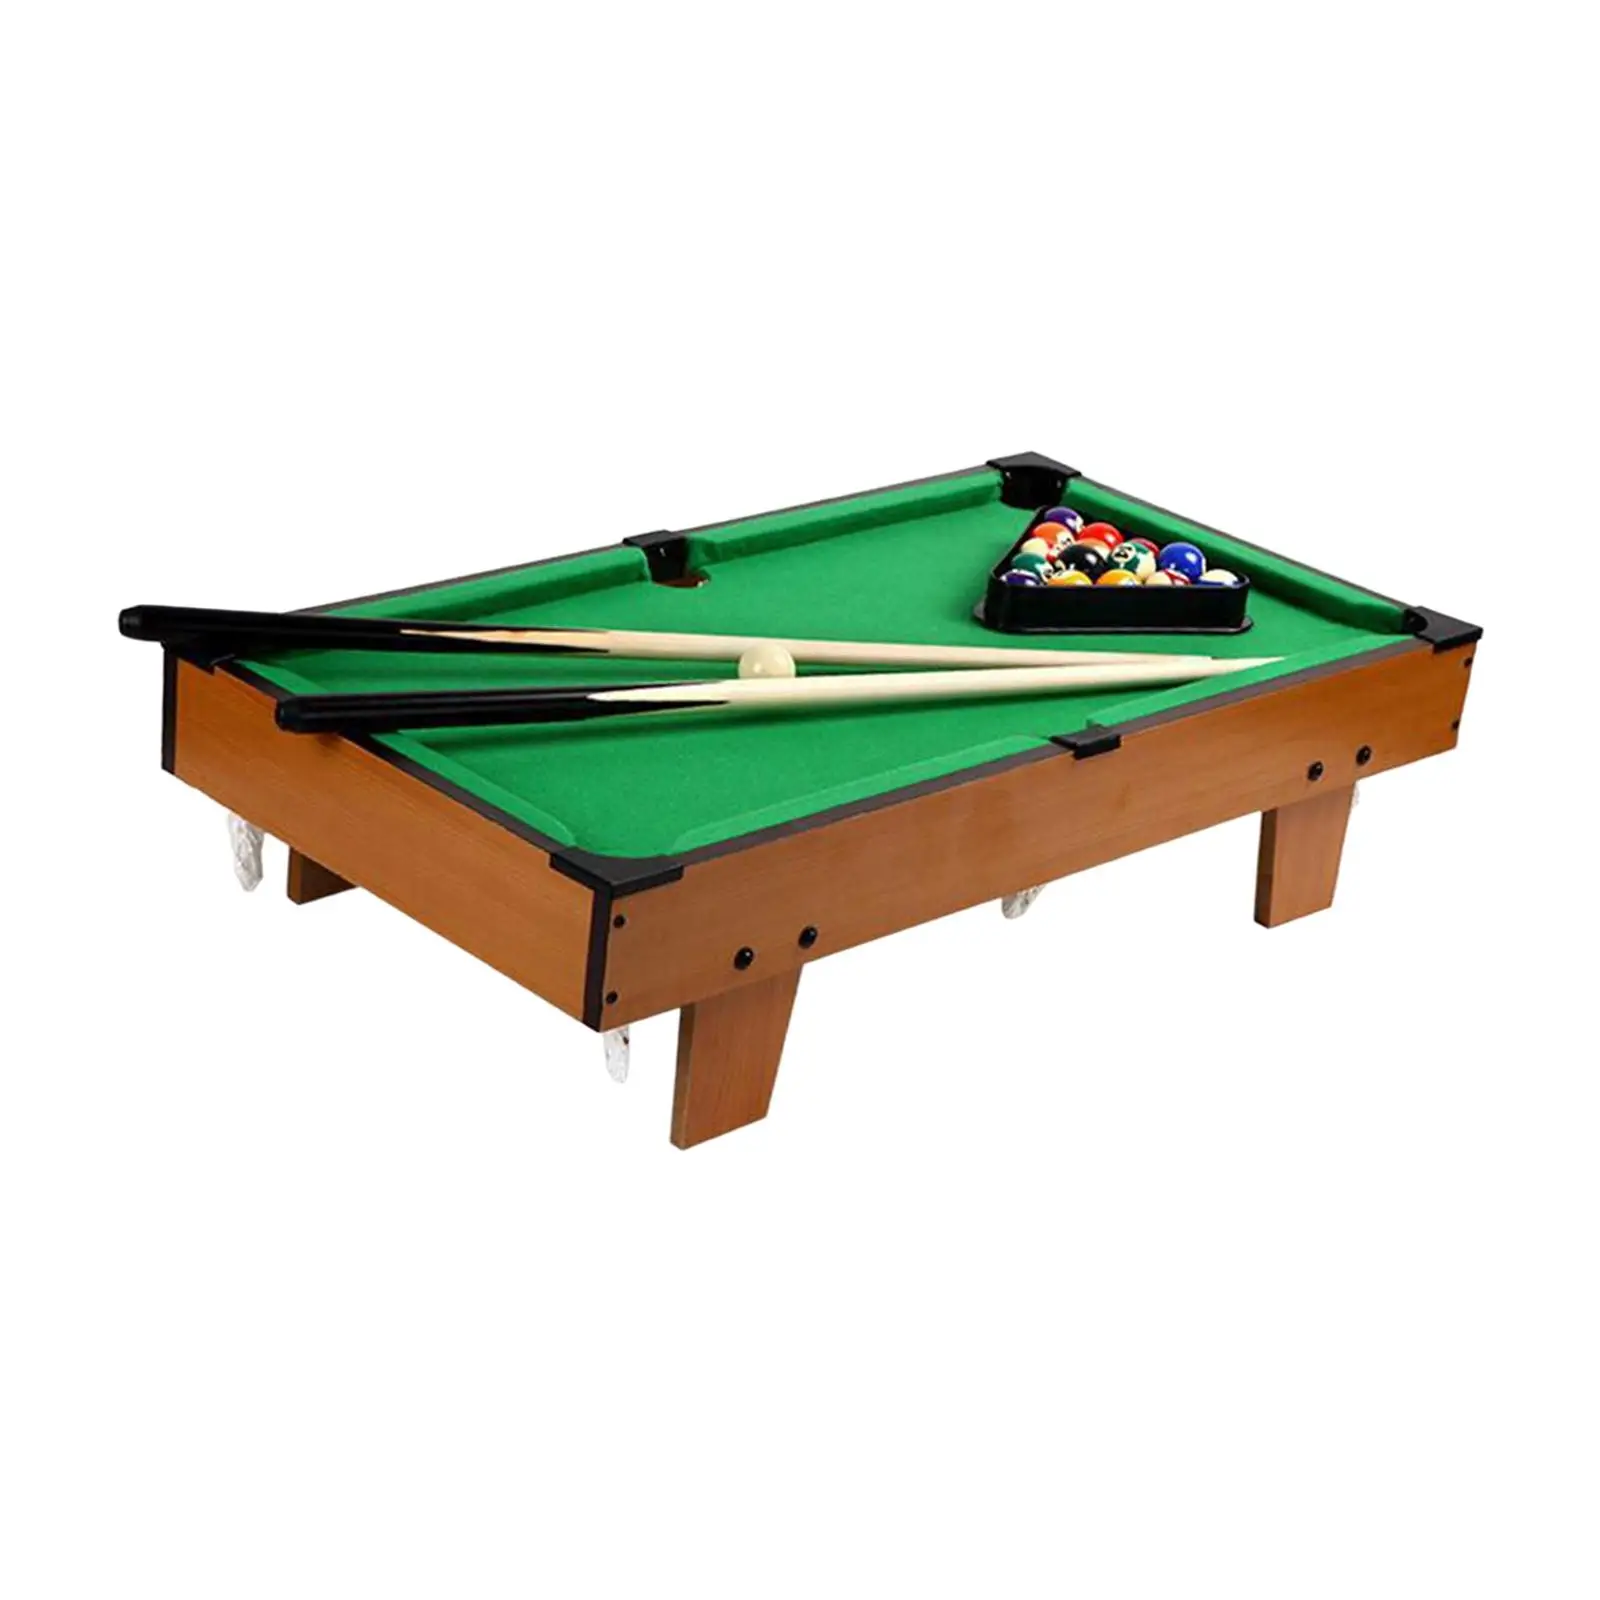 Pool Table Set Game Toy Chalk, Triangle Board Games Billiard Cues Leisure Wood